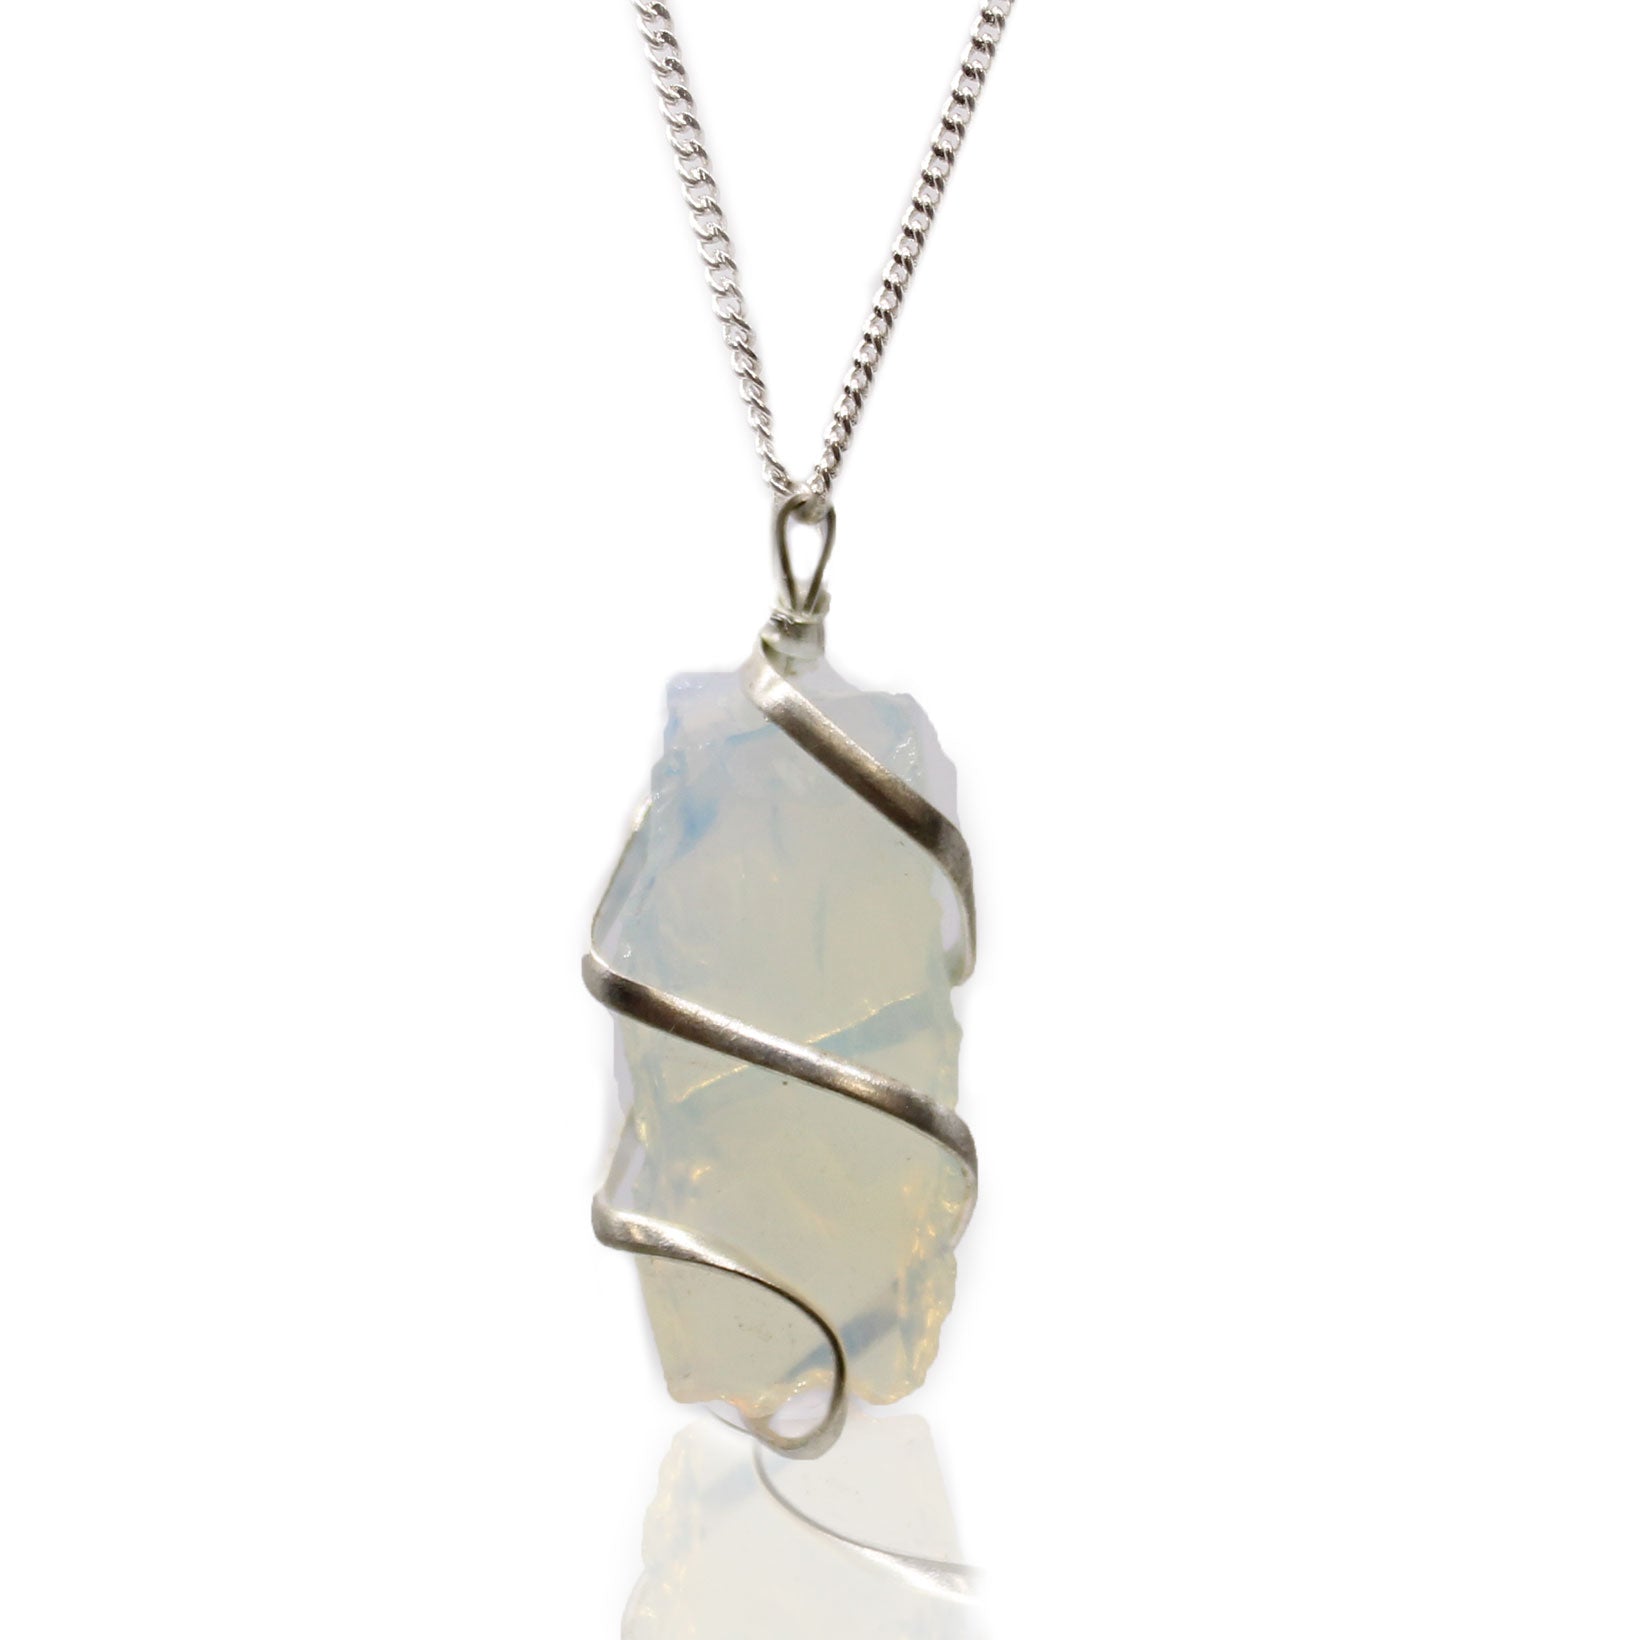 View Cascade Wrapped Gemstone Necklace Rough Opalite information